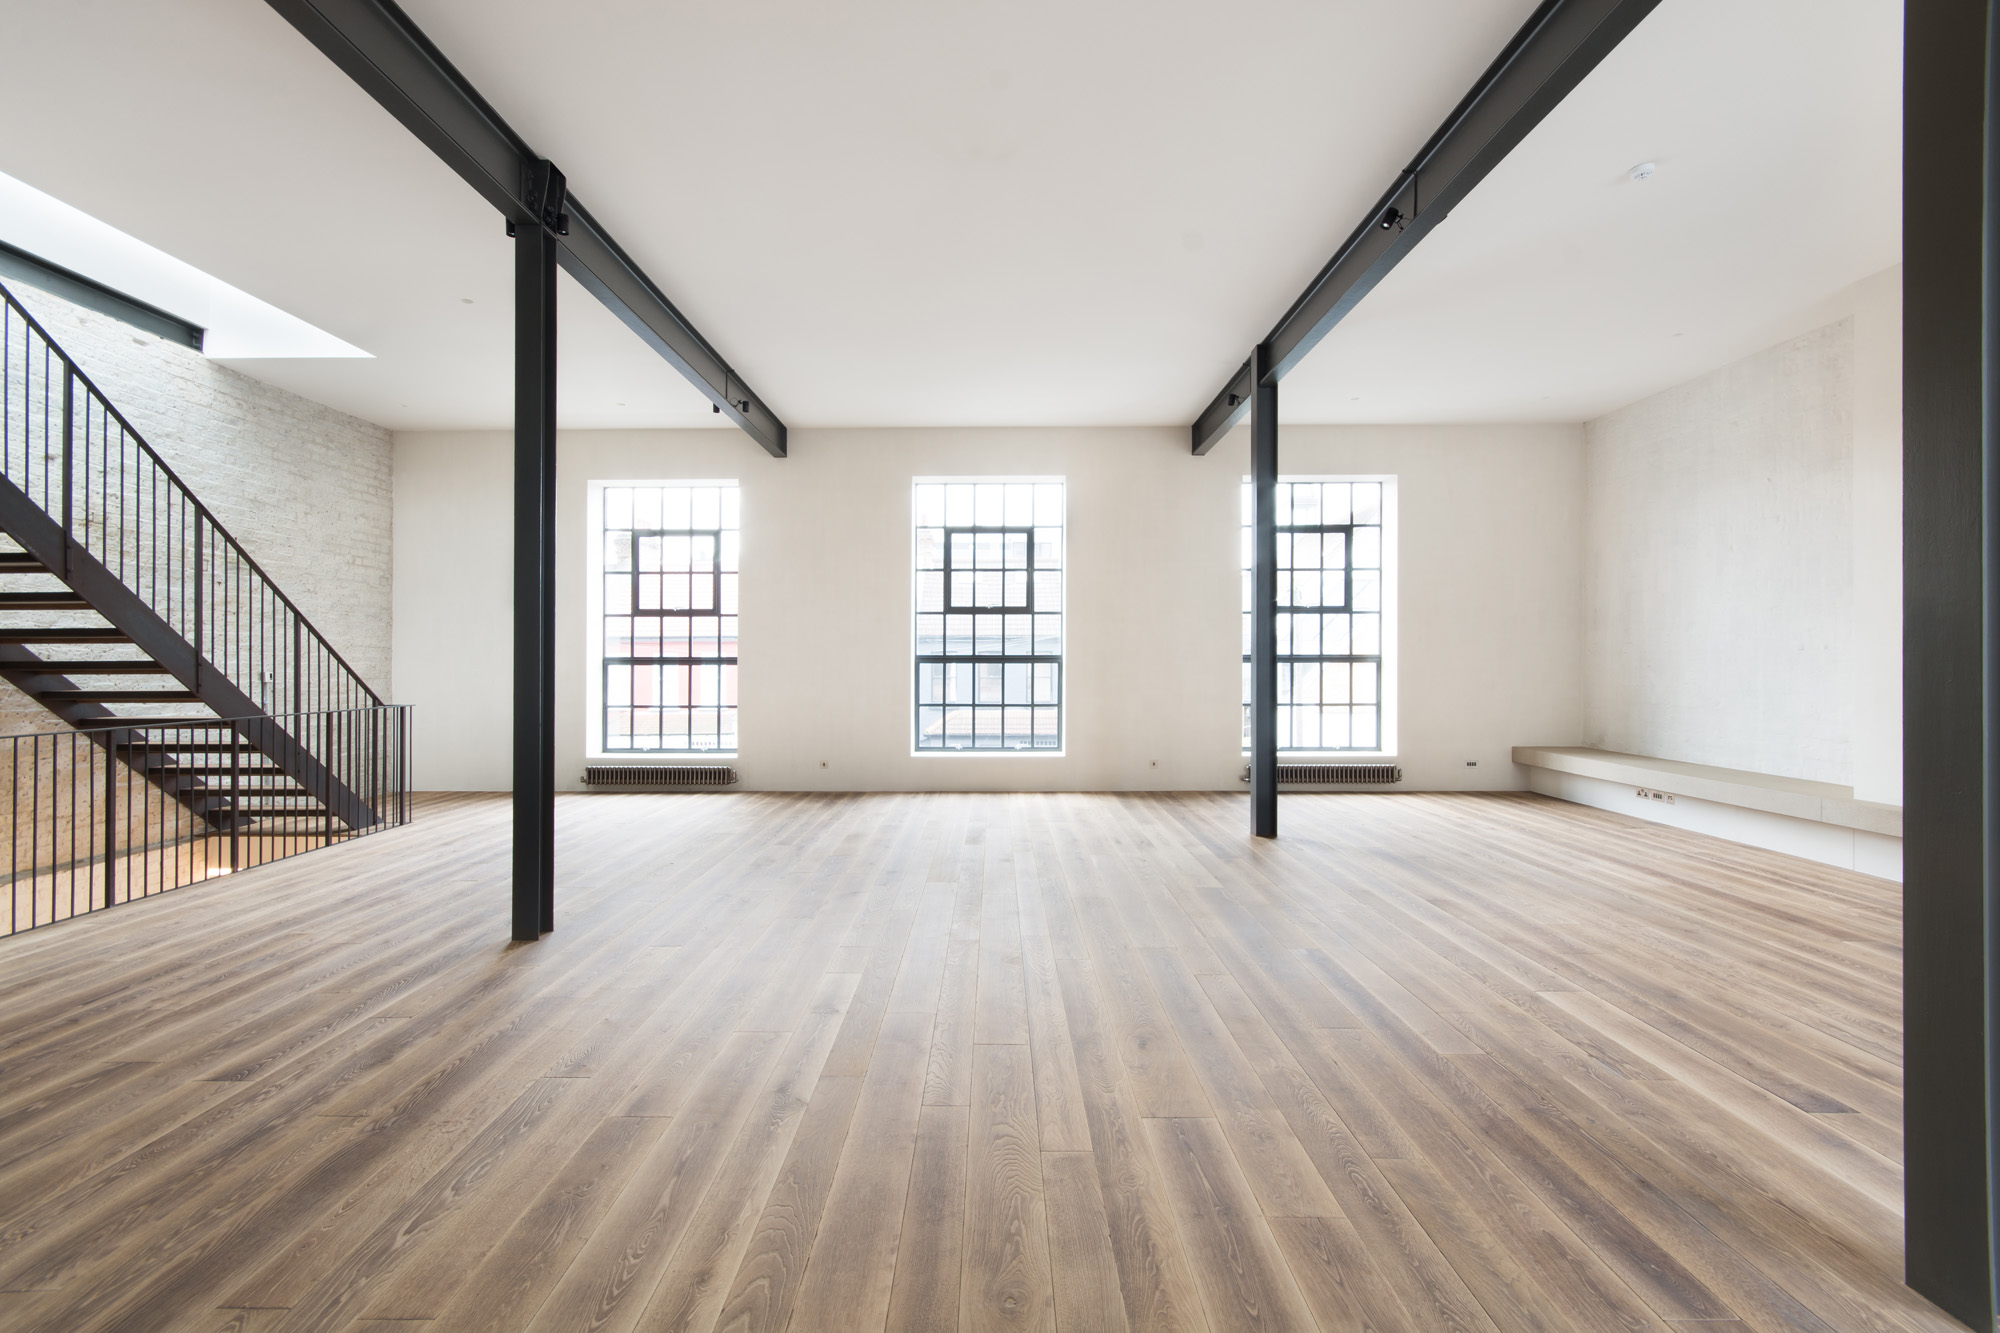 For Rent: Pember House Kensal Green NW10 industrial reception room